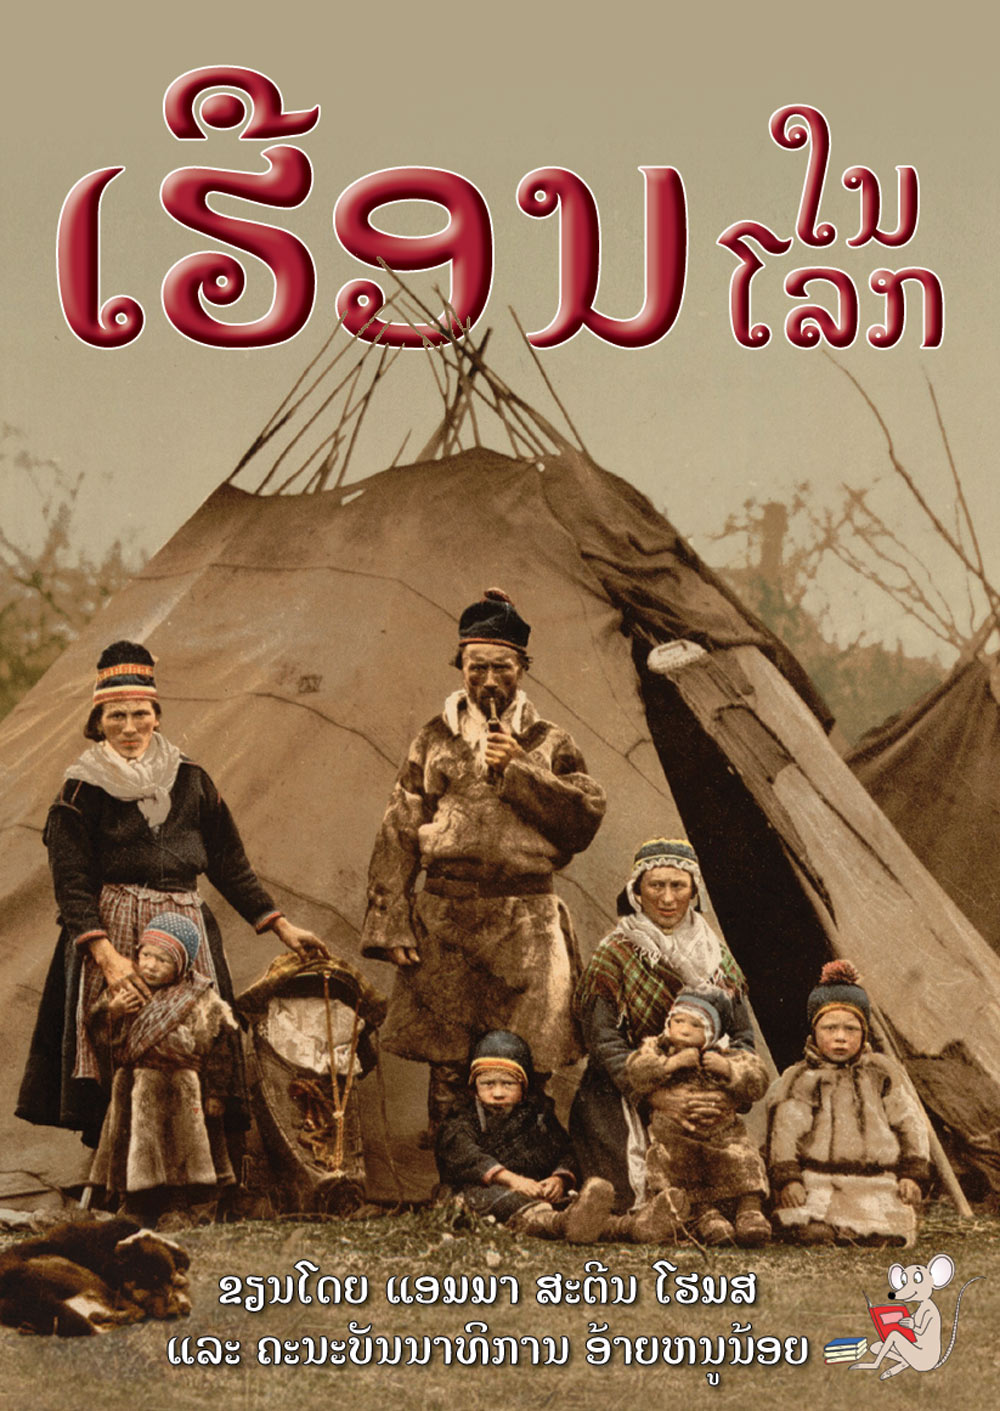 Homes Around the World large book cover, published in Lao language